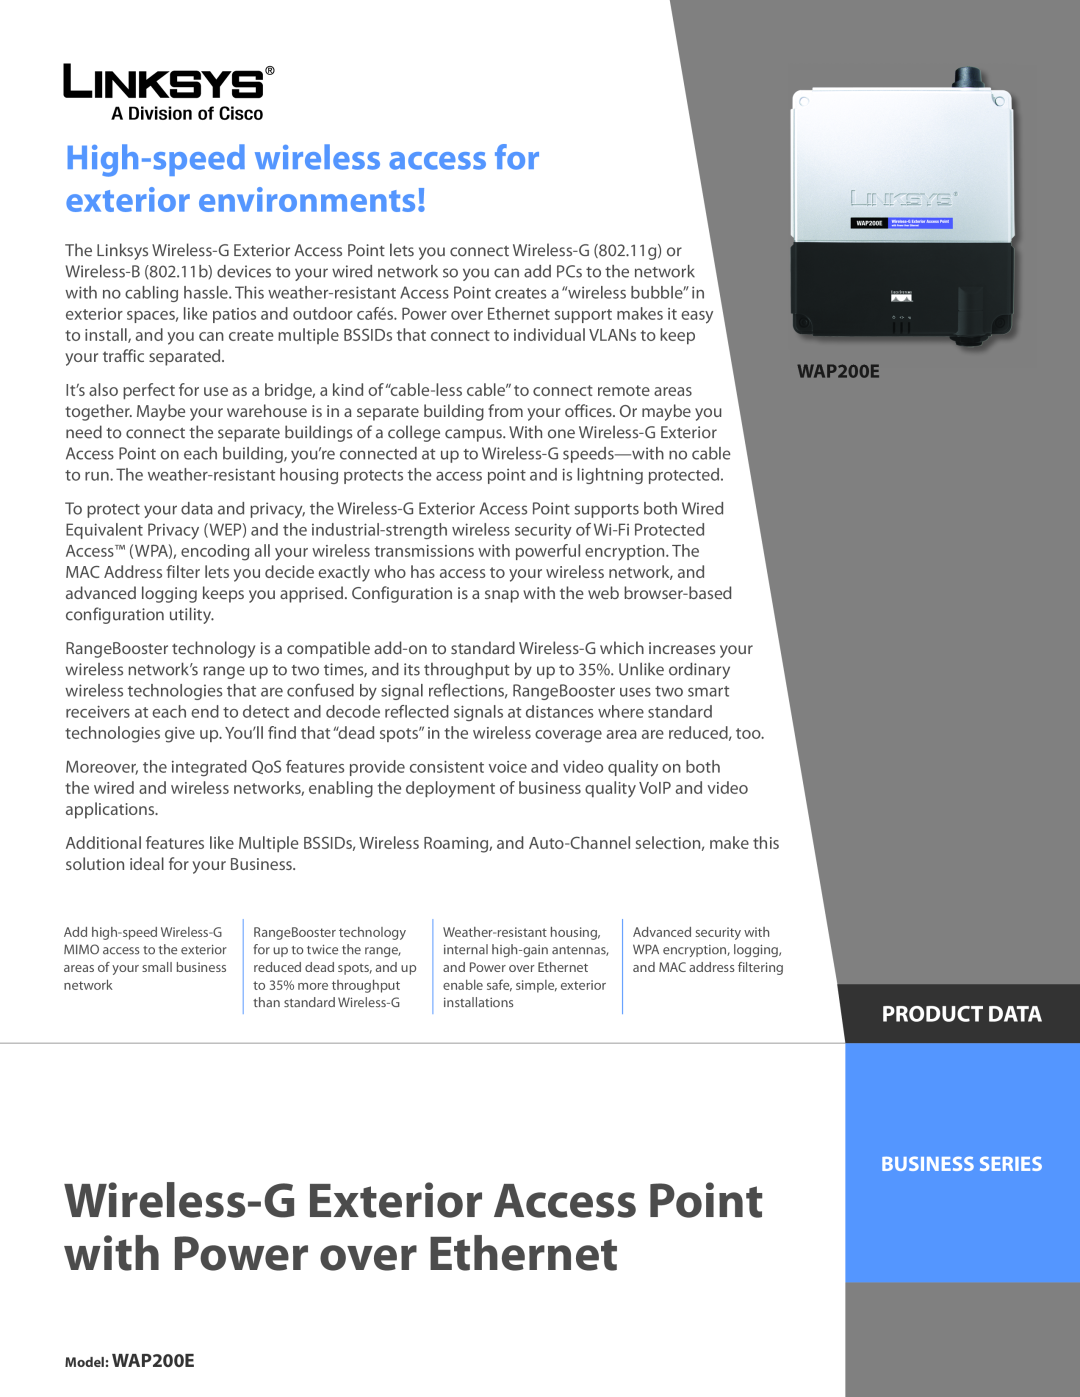 Linksys WAP200E manual Product Data, Business Series, Wireless-G Exterior Access Point with Power over Ethernet 